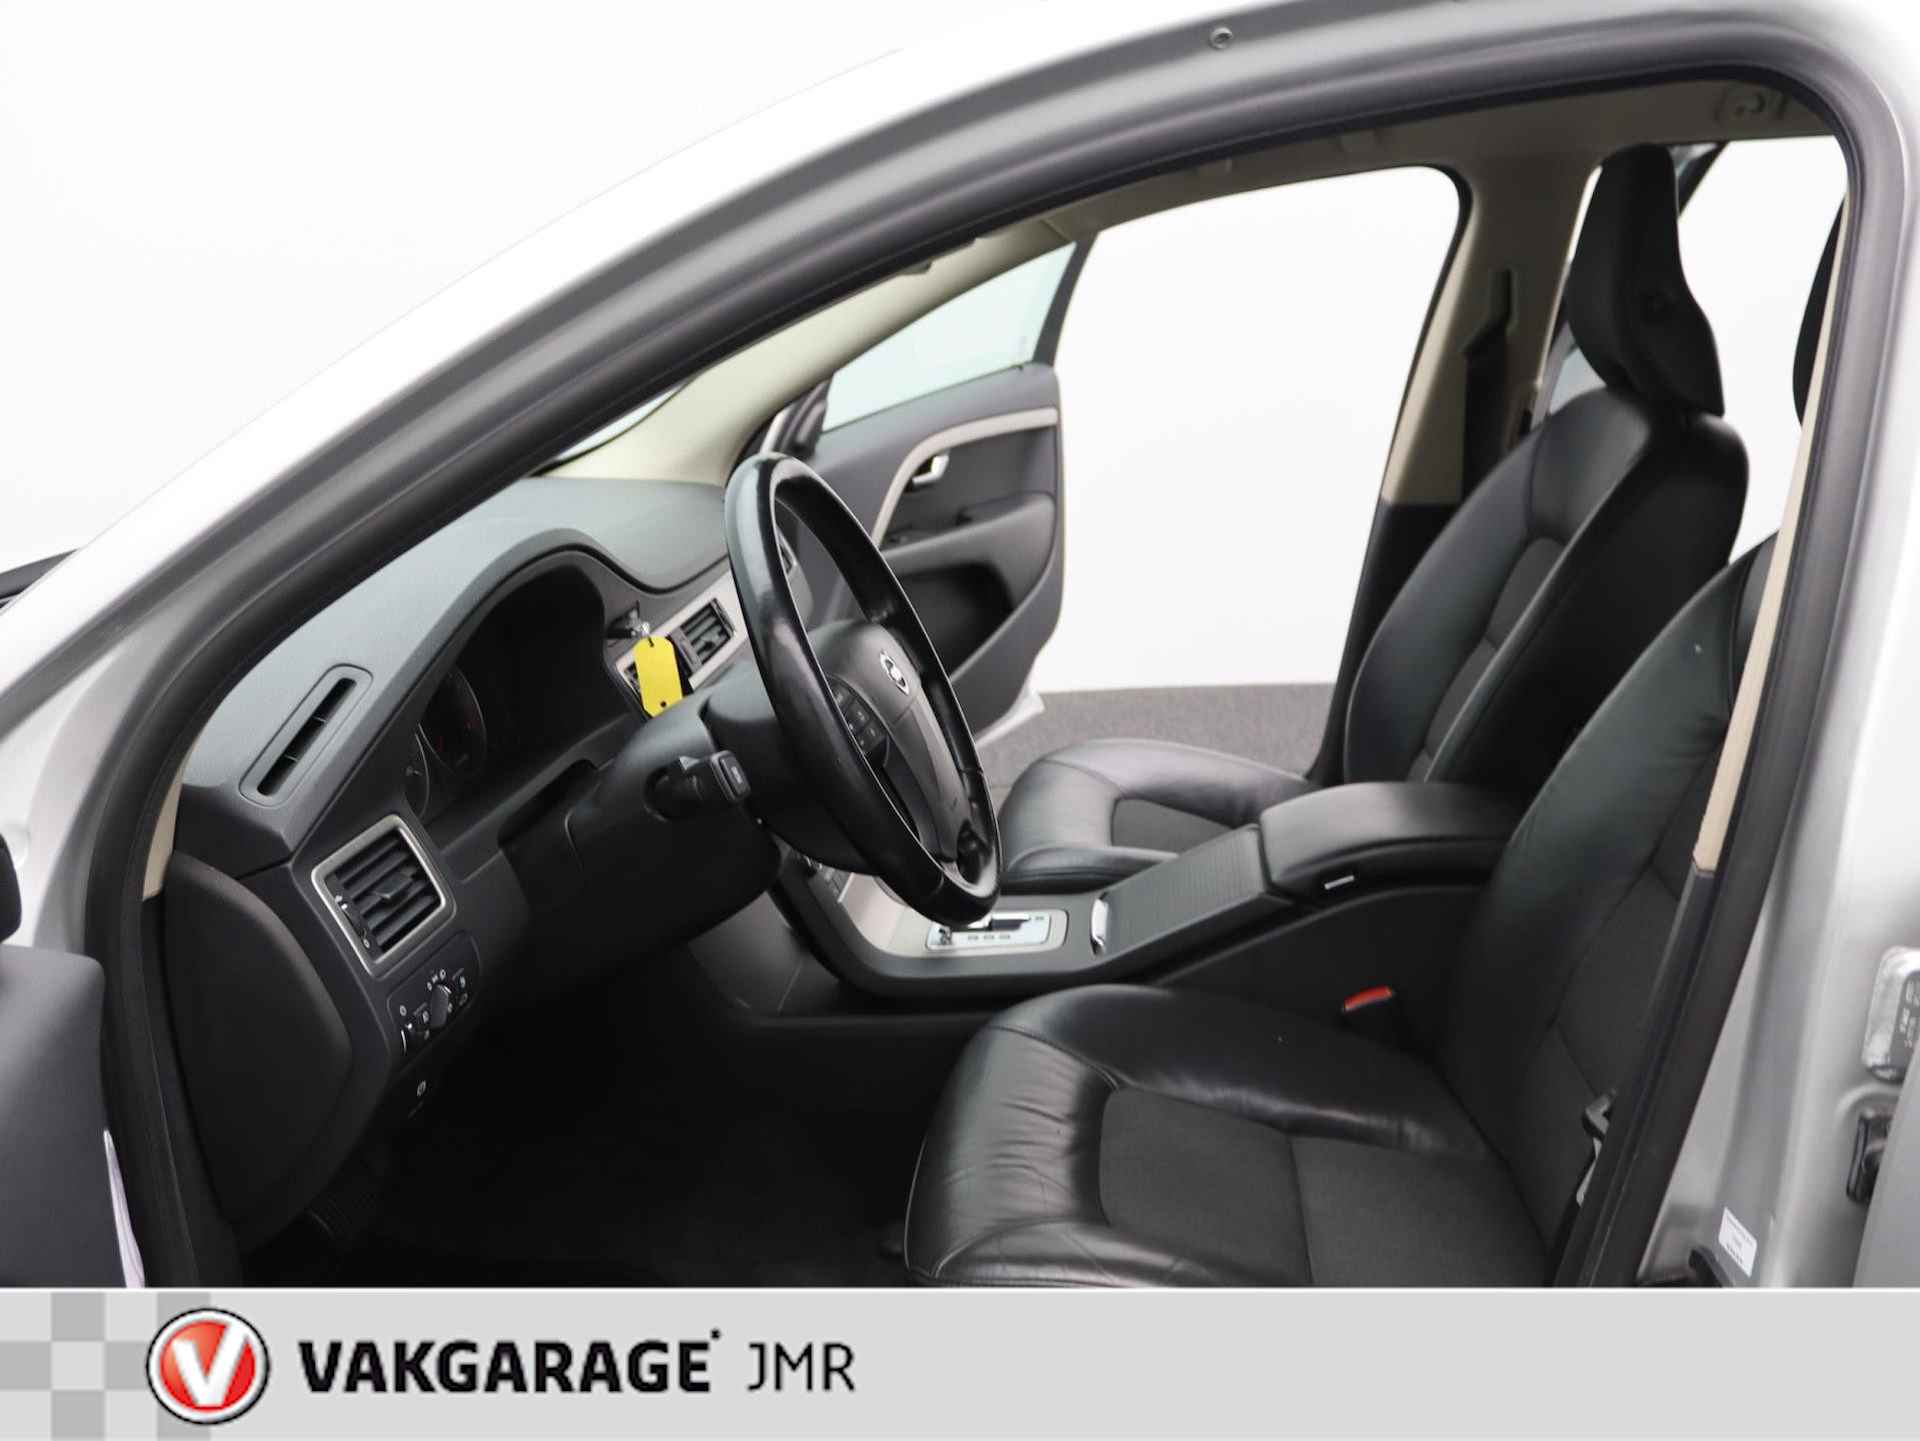 Volvo V70 2.5FT Momentum Youngtimer Trekhaak - PDC Achter - Stoel + Achterbank verwarming - Bluetooth - Climate en Cruise Control - 7/39